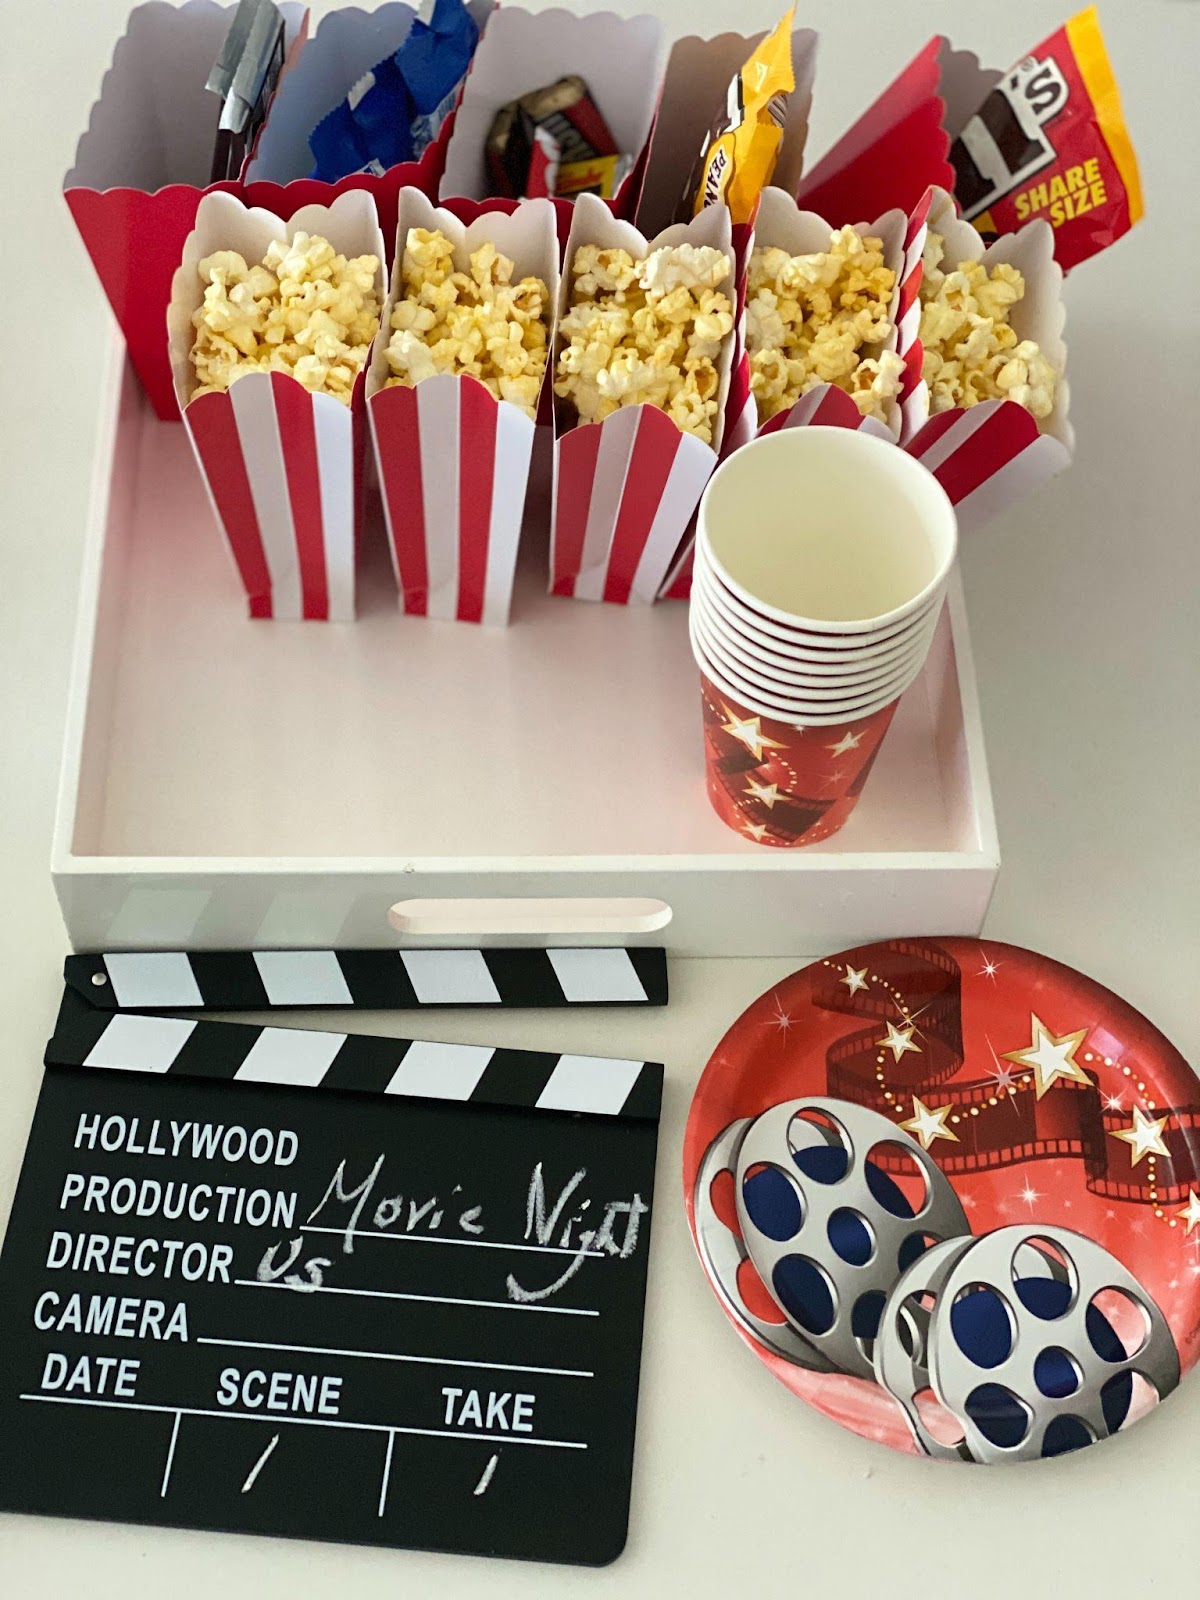  It’s the most wonderful time of the year, especially if you love watching funny holiday movies. Here’s a list and the top tips for a successful family movie night at home.